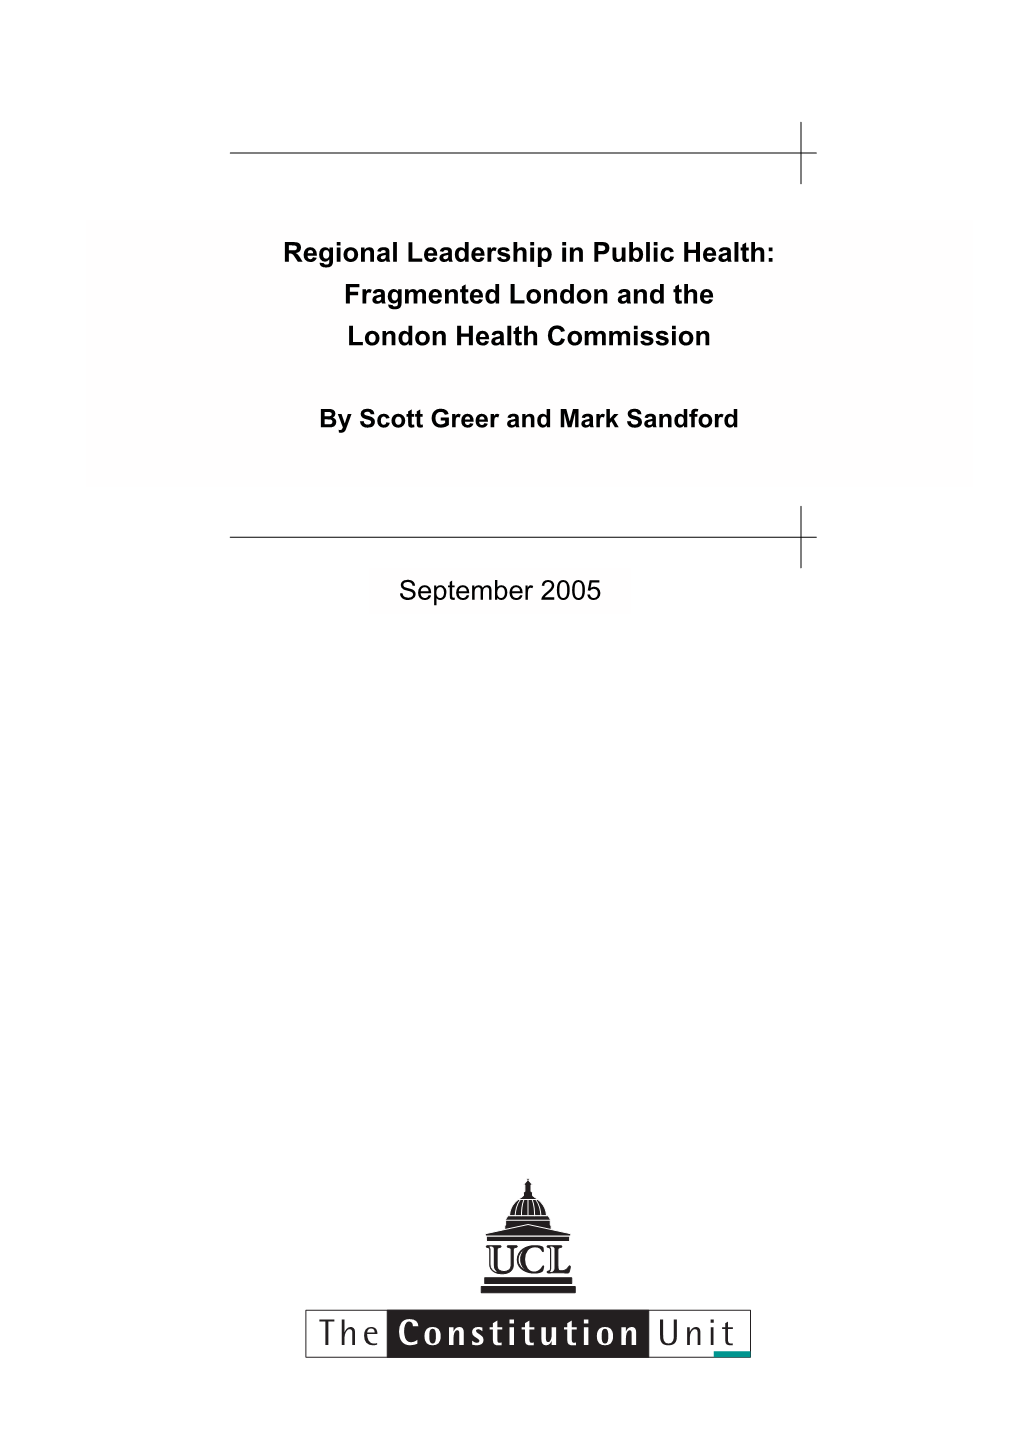 Regional Leadership in Public Health: Fragmented London and the London Health Commission